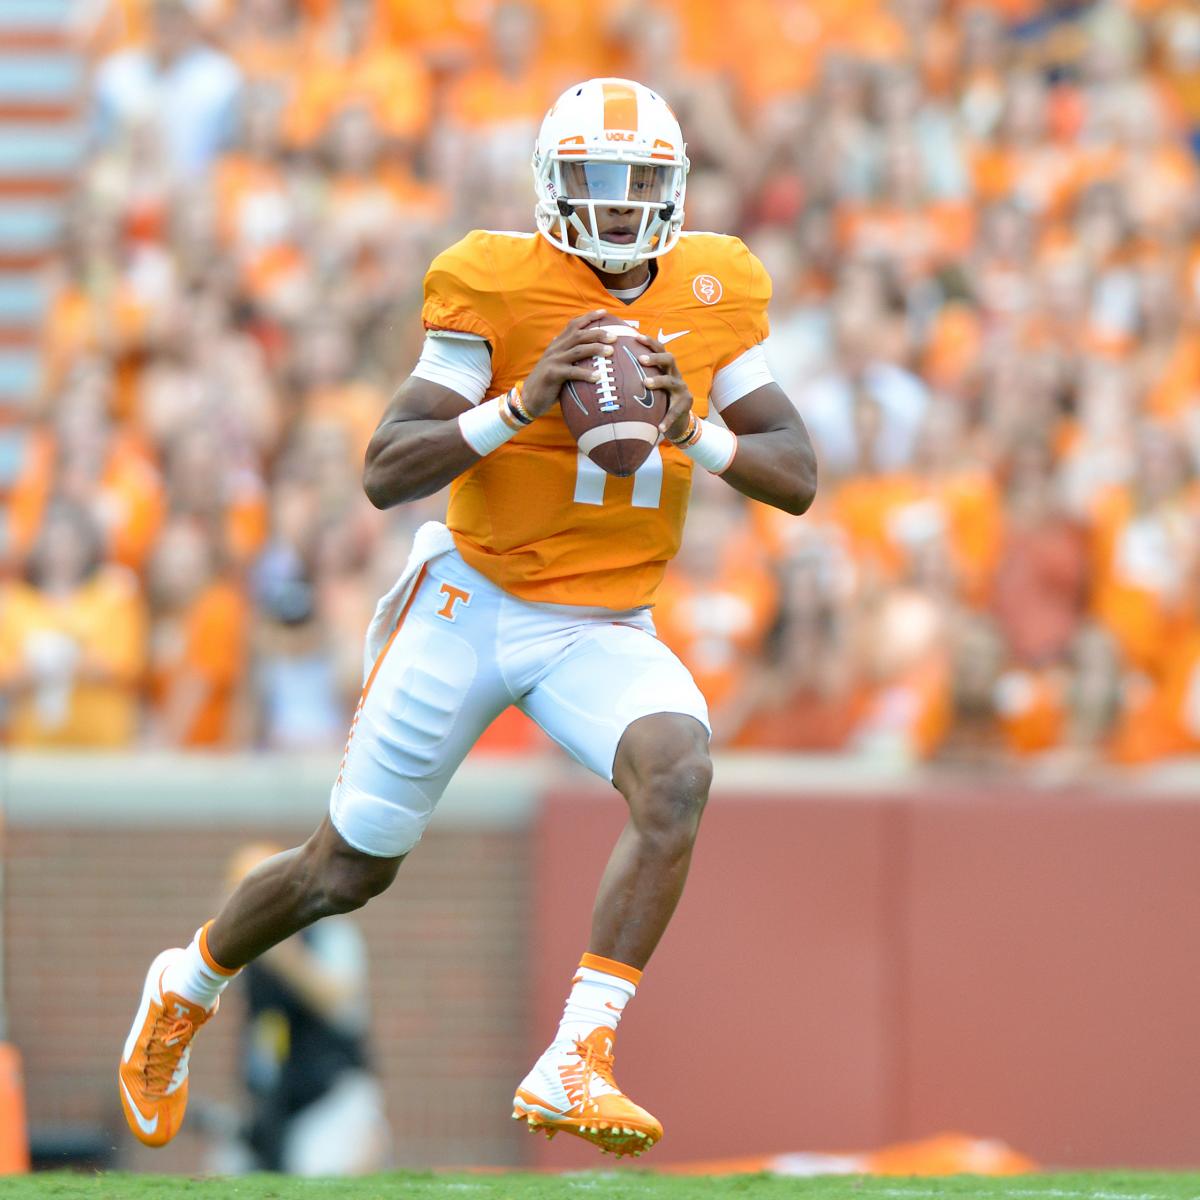 Josh Dobbs: The Rocket Scientist QB Who Could Be the Next NFL Draft Steal | Bleacher Report